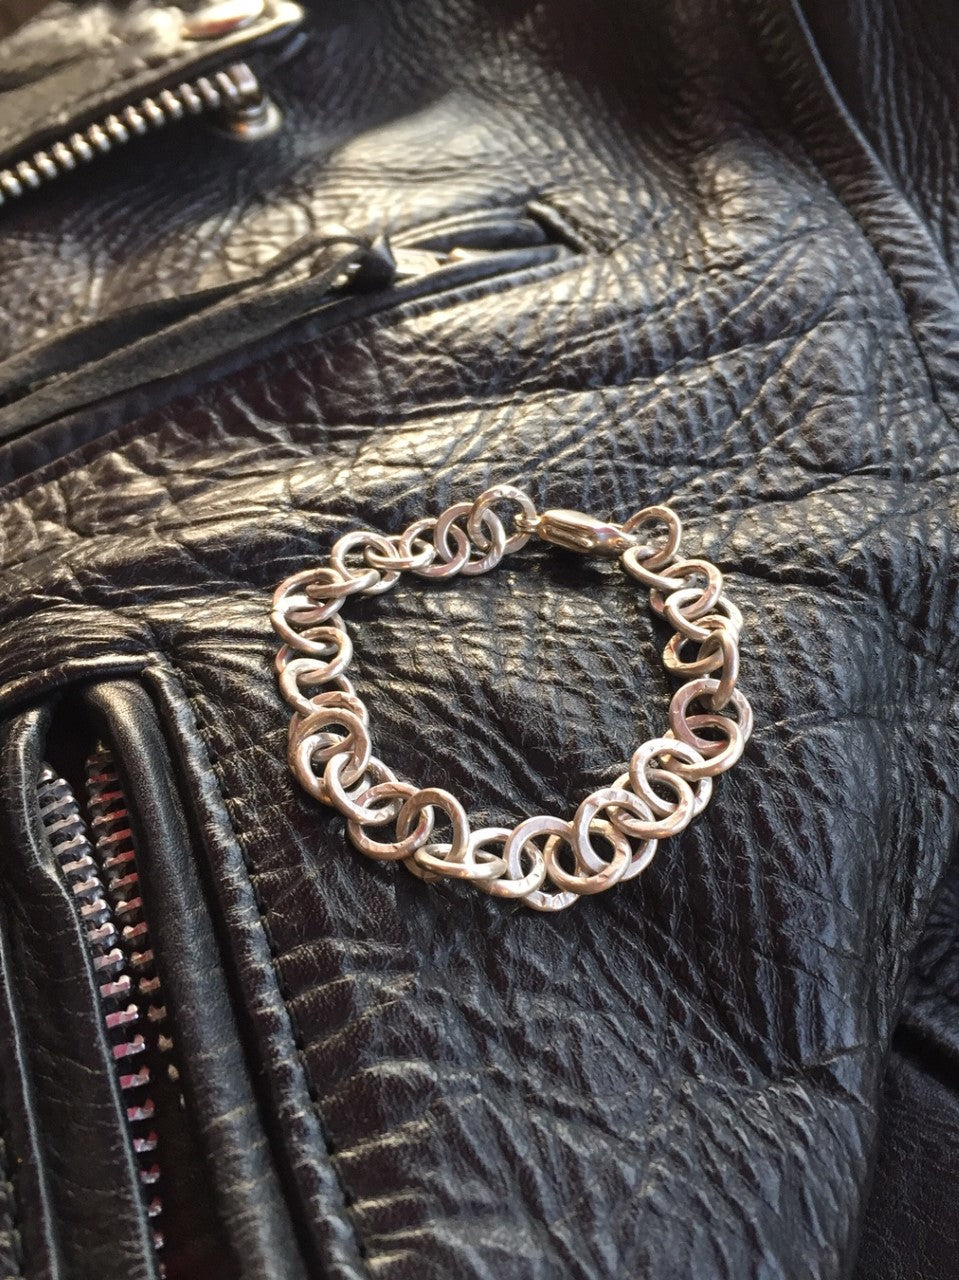 Sterling Silver O' Link Ring Hammered Circle Chain Bracelet / Cuff with Matte Finish For Men & Women ユニセックス・シルバー・チェーンブレスレット・チャンキー・ストリート・ハードウェア